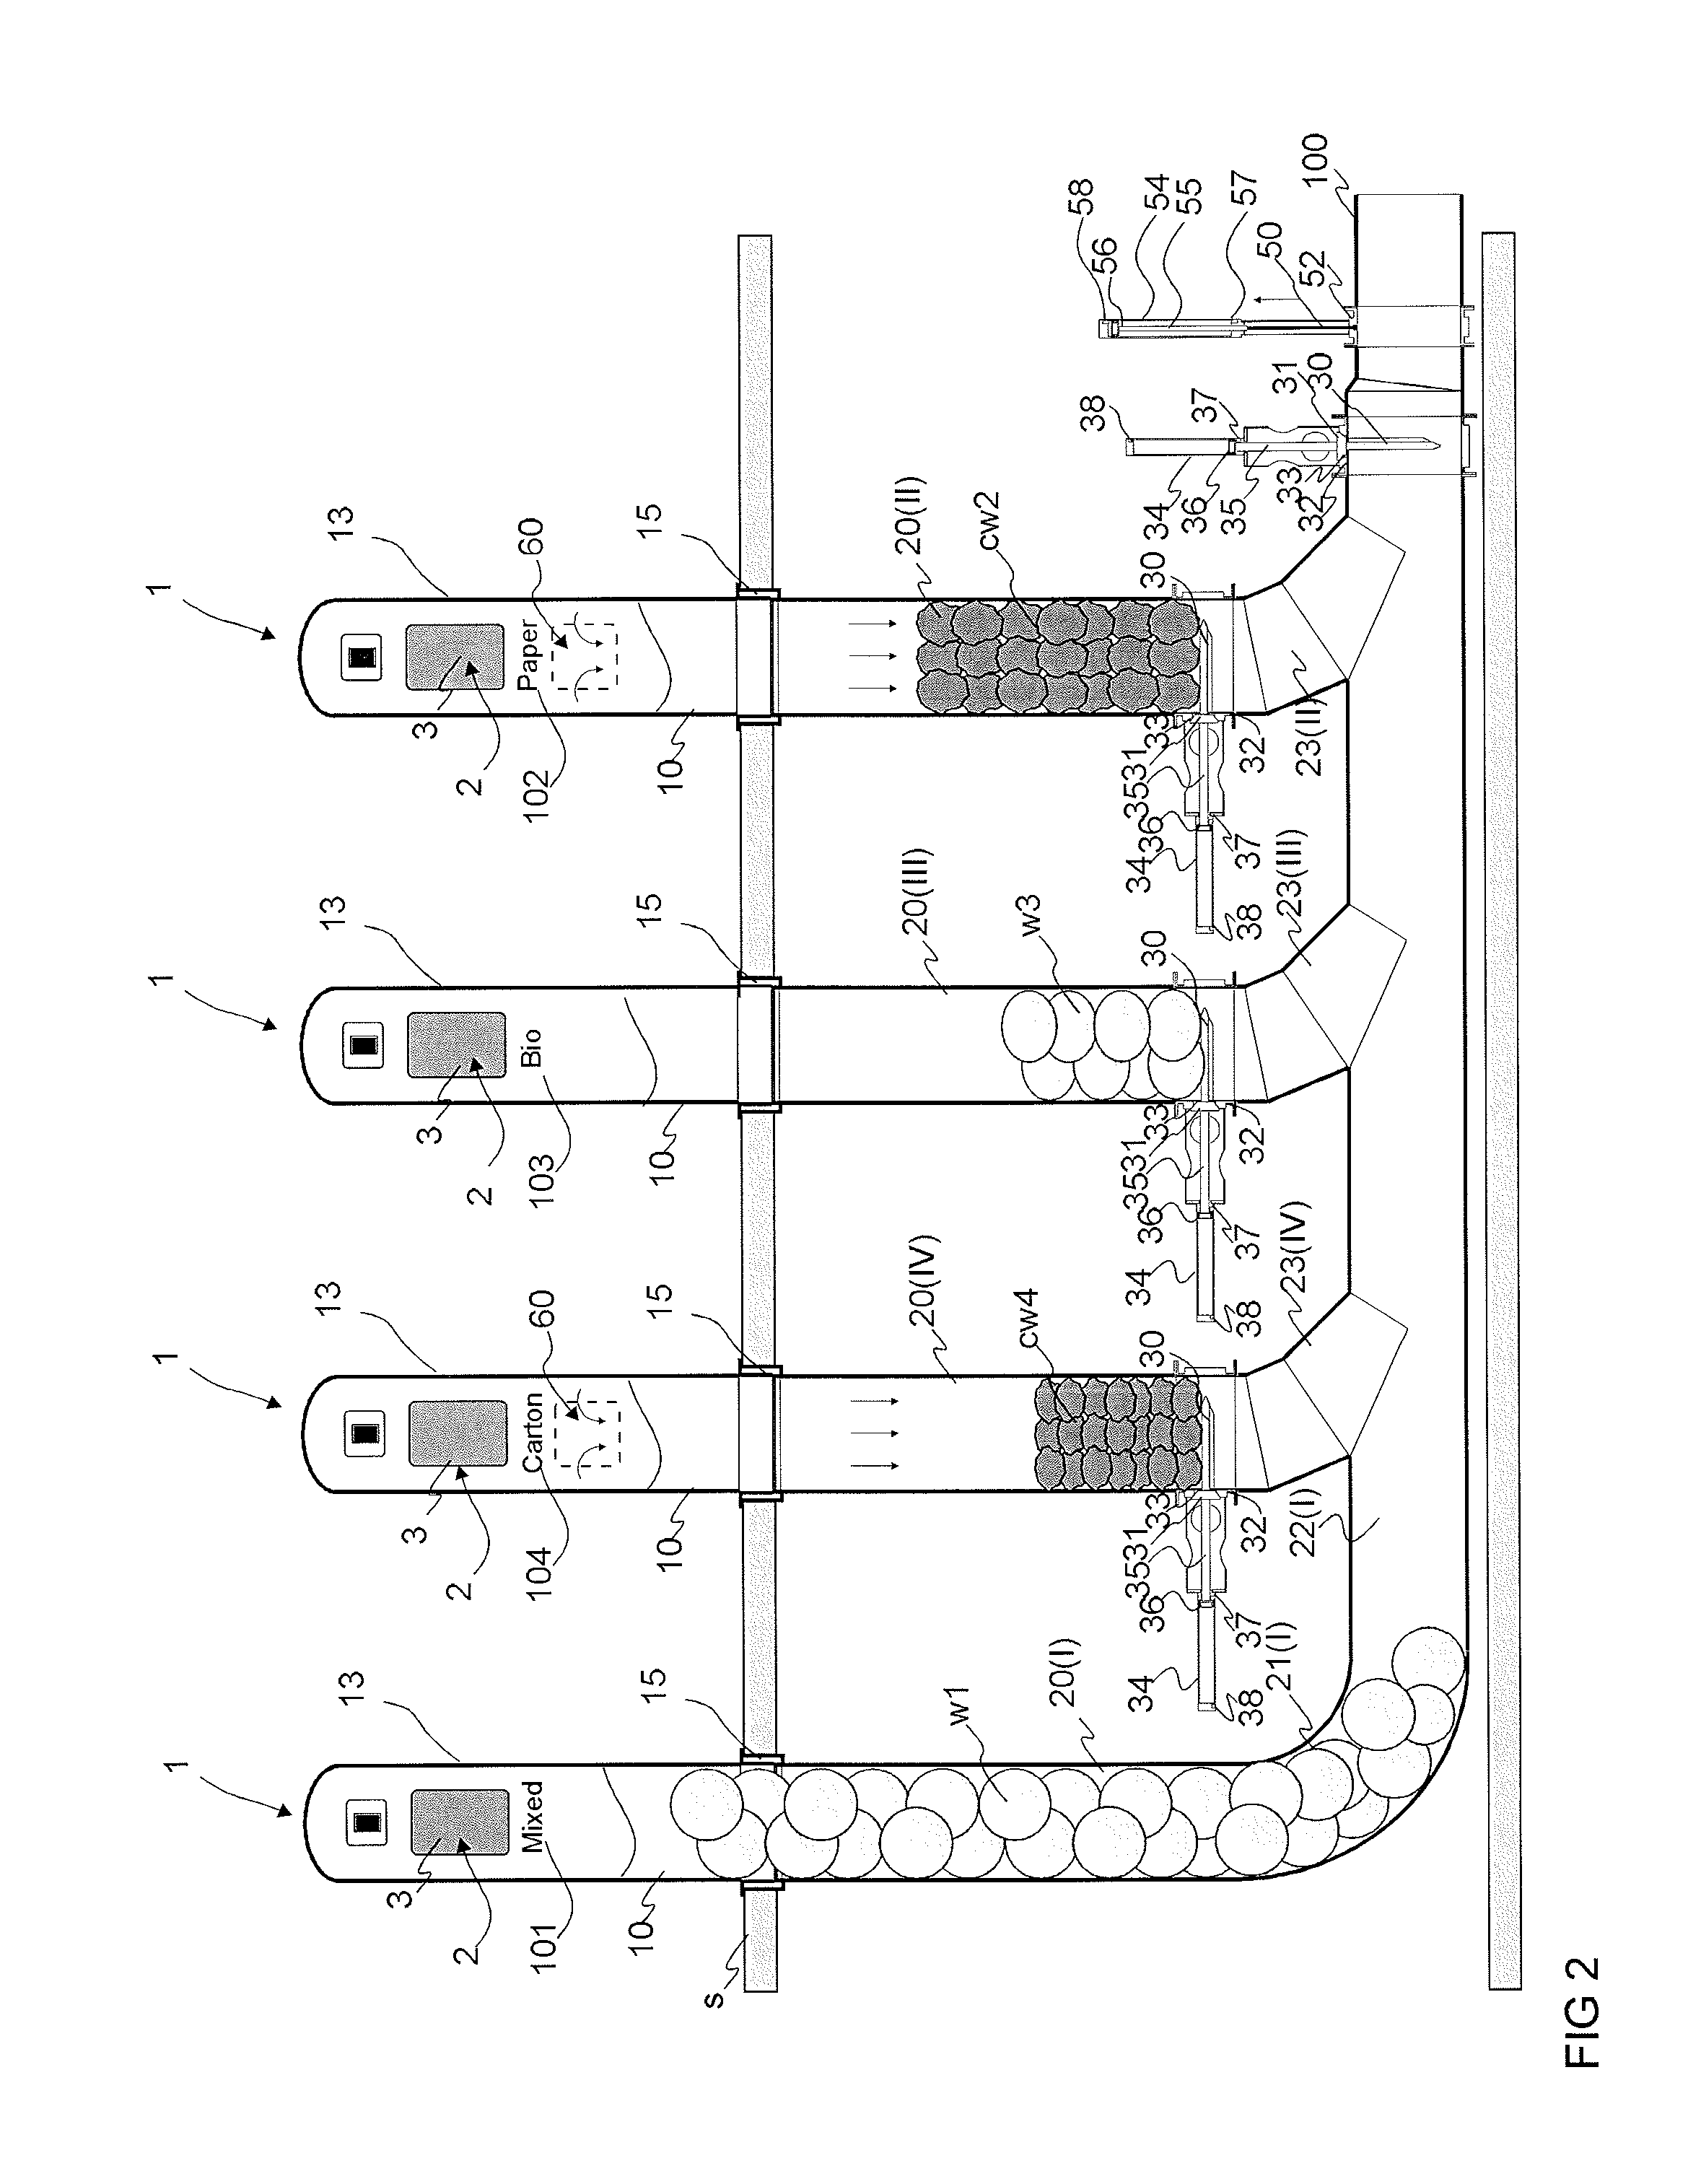 Method and apparatus for feeding in and handling waste material